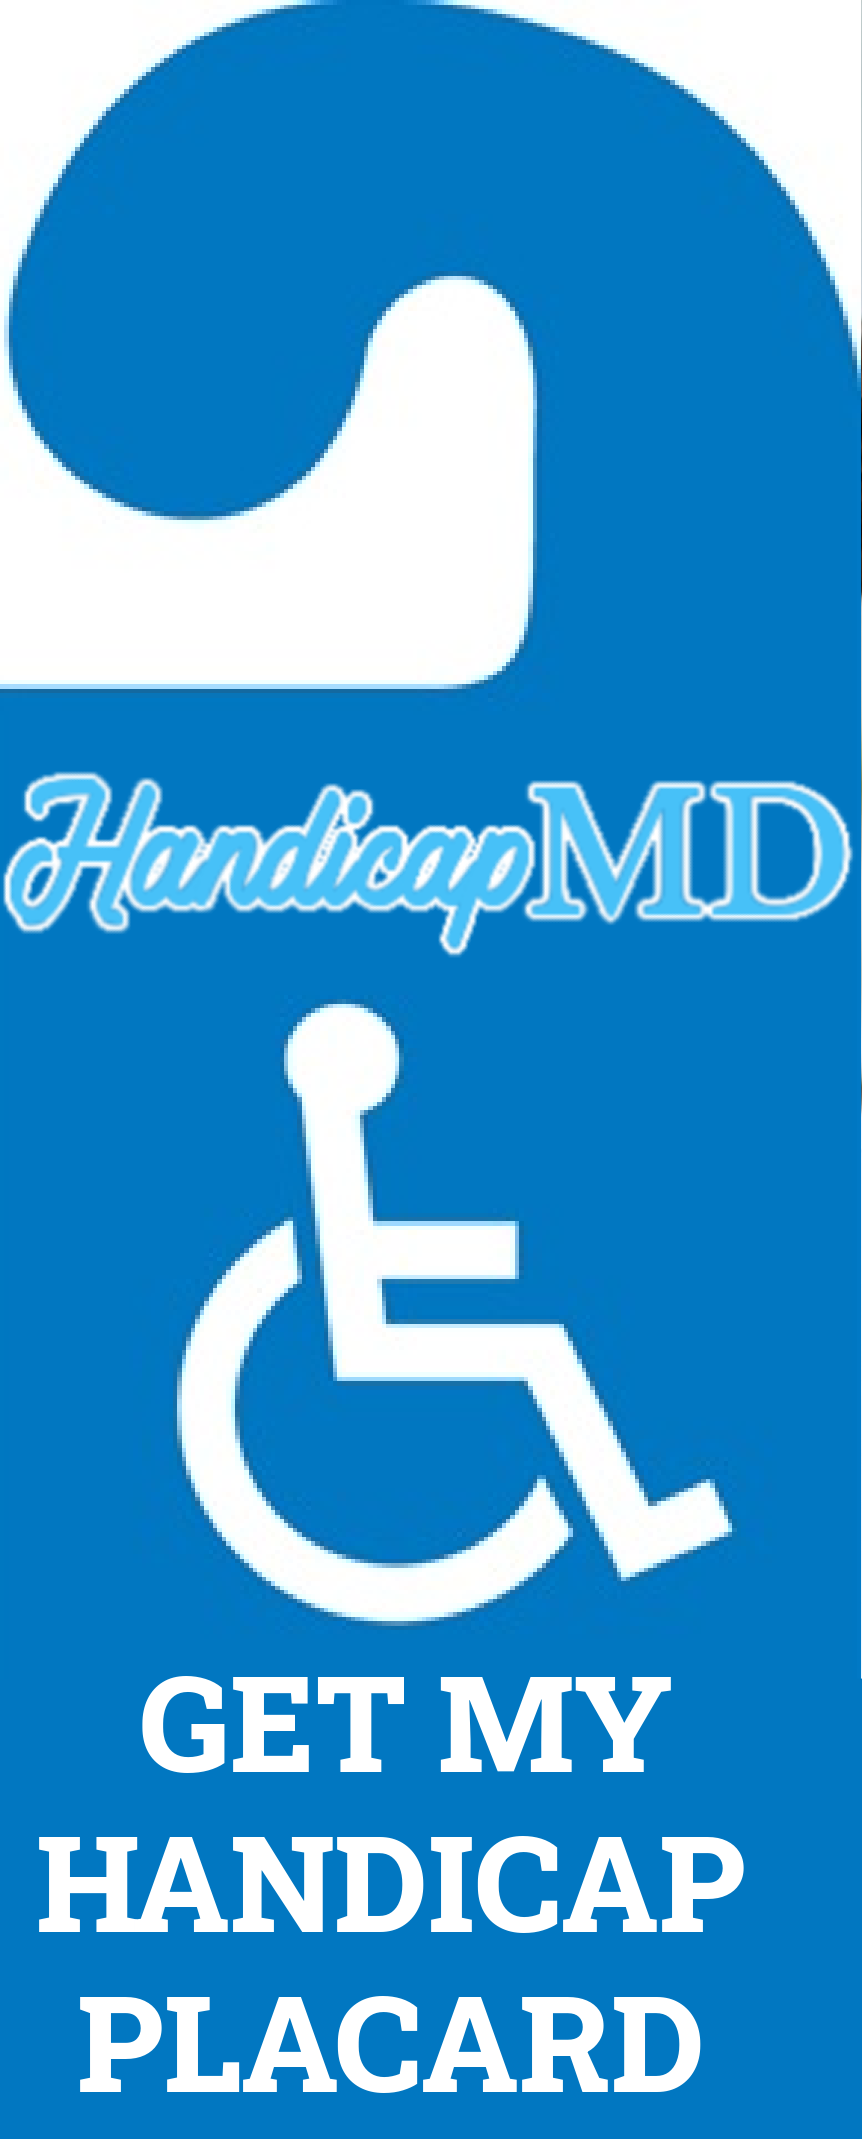 Limited Or No Use Of Limbs, Amputee Qualifying Conditions for a DMV Handicap Parking Permit